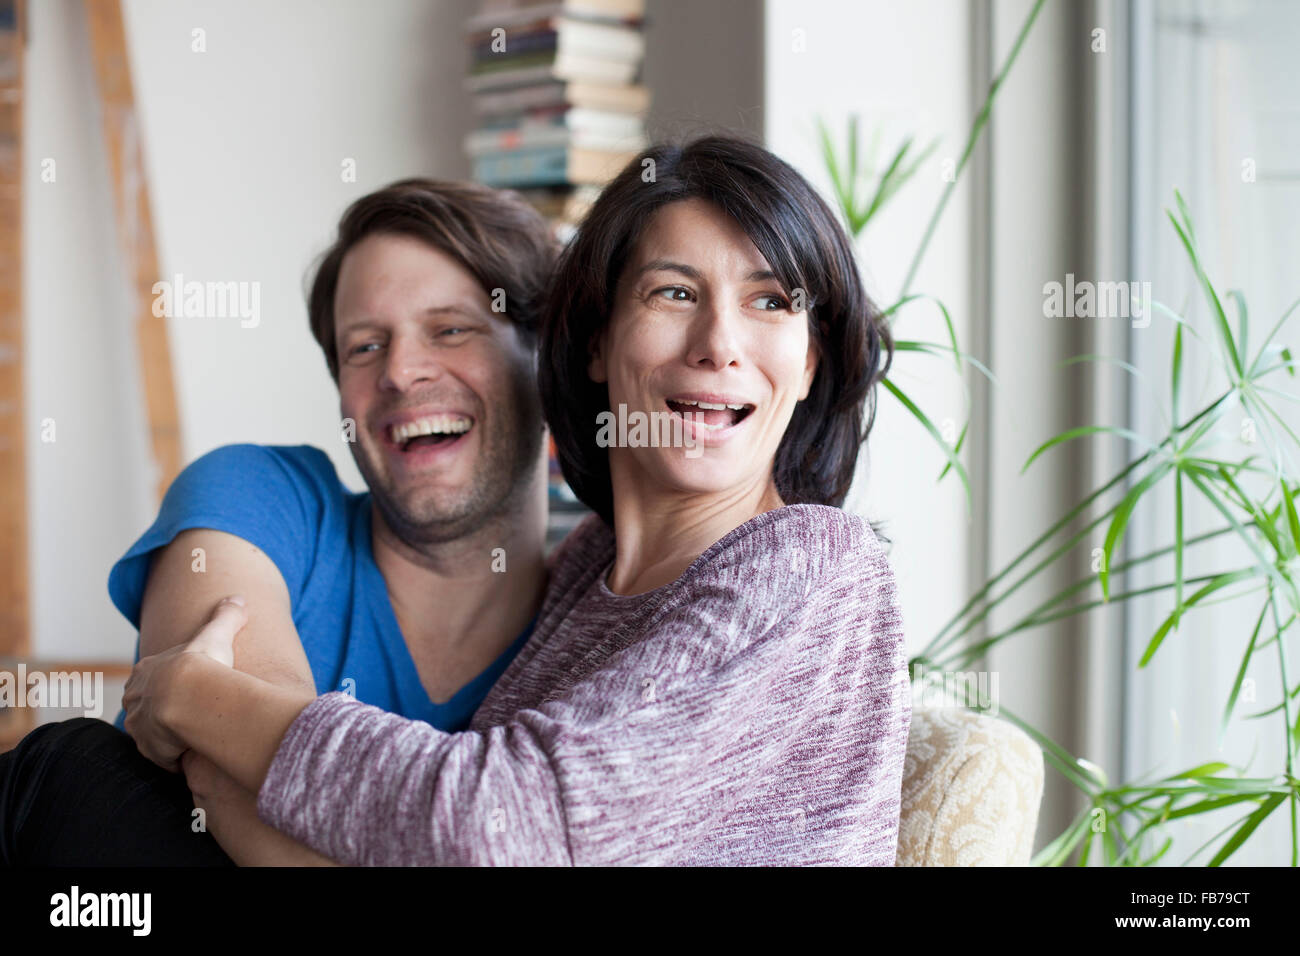 Mature couple embracing each other and smiling Stock Photo